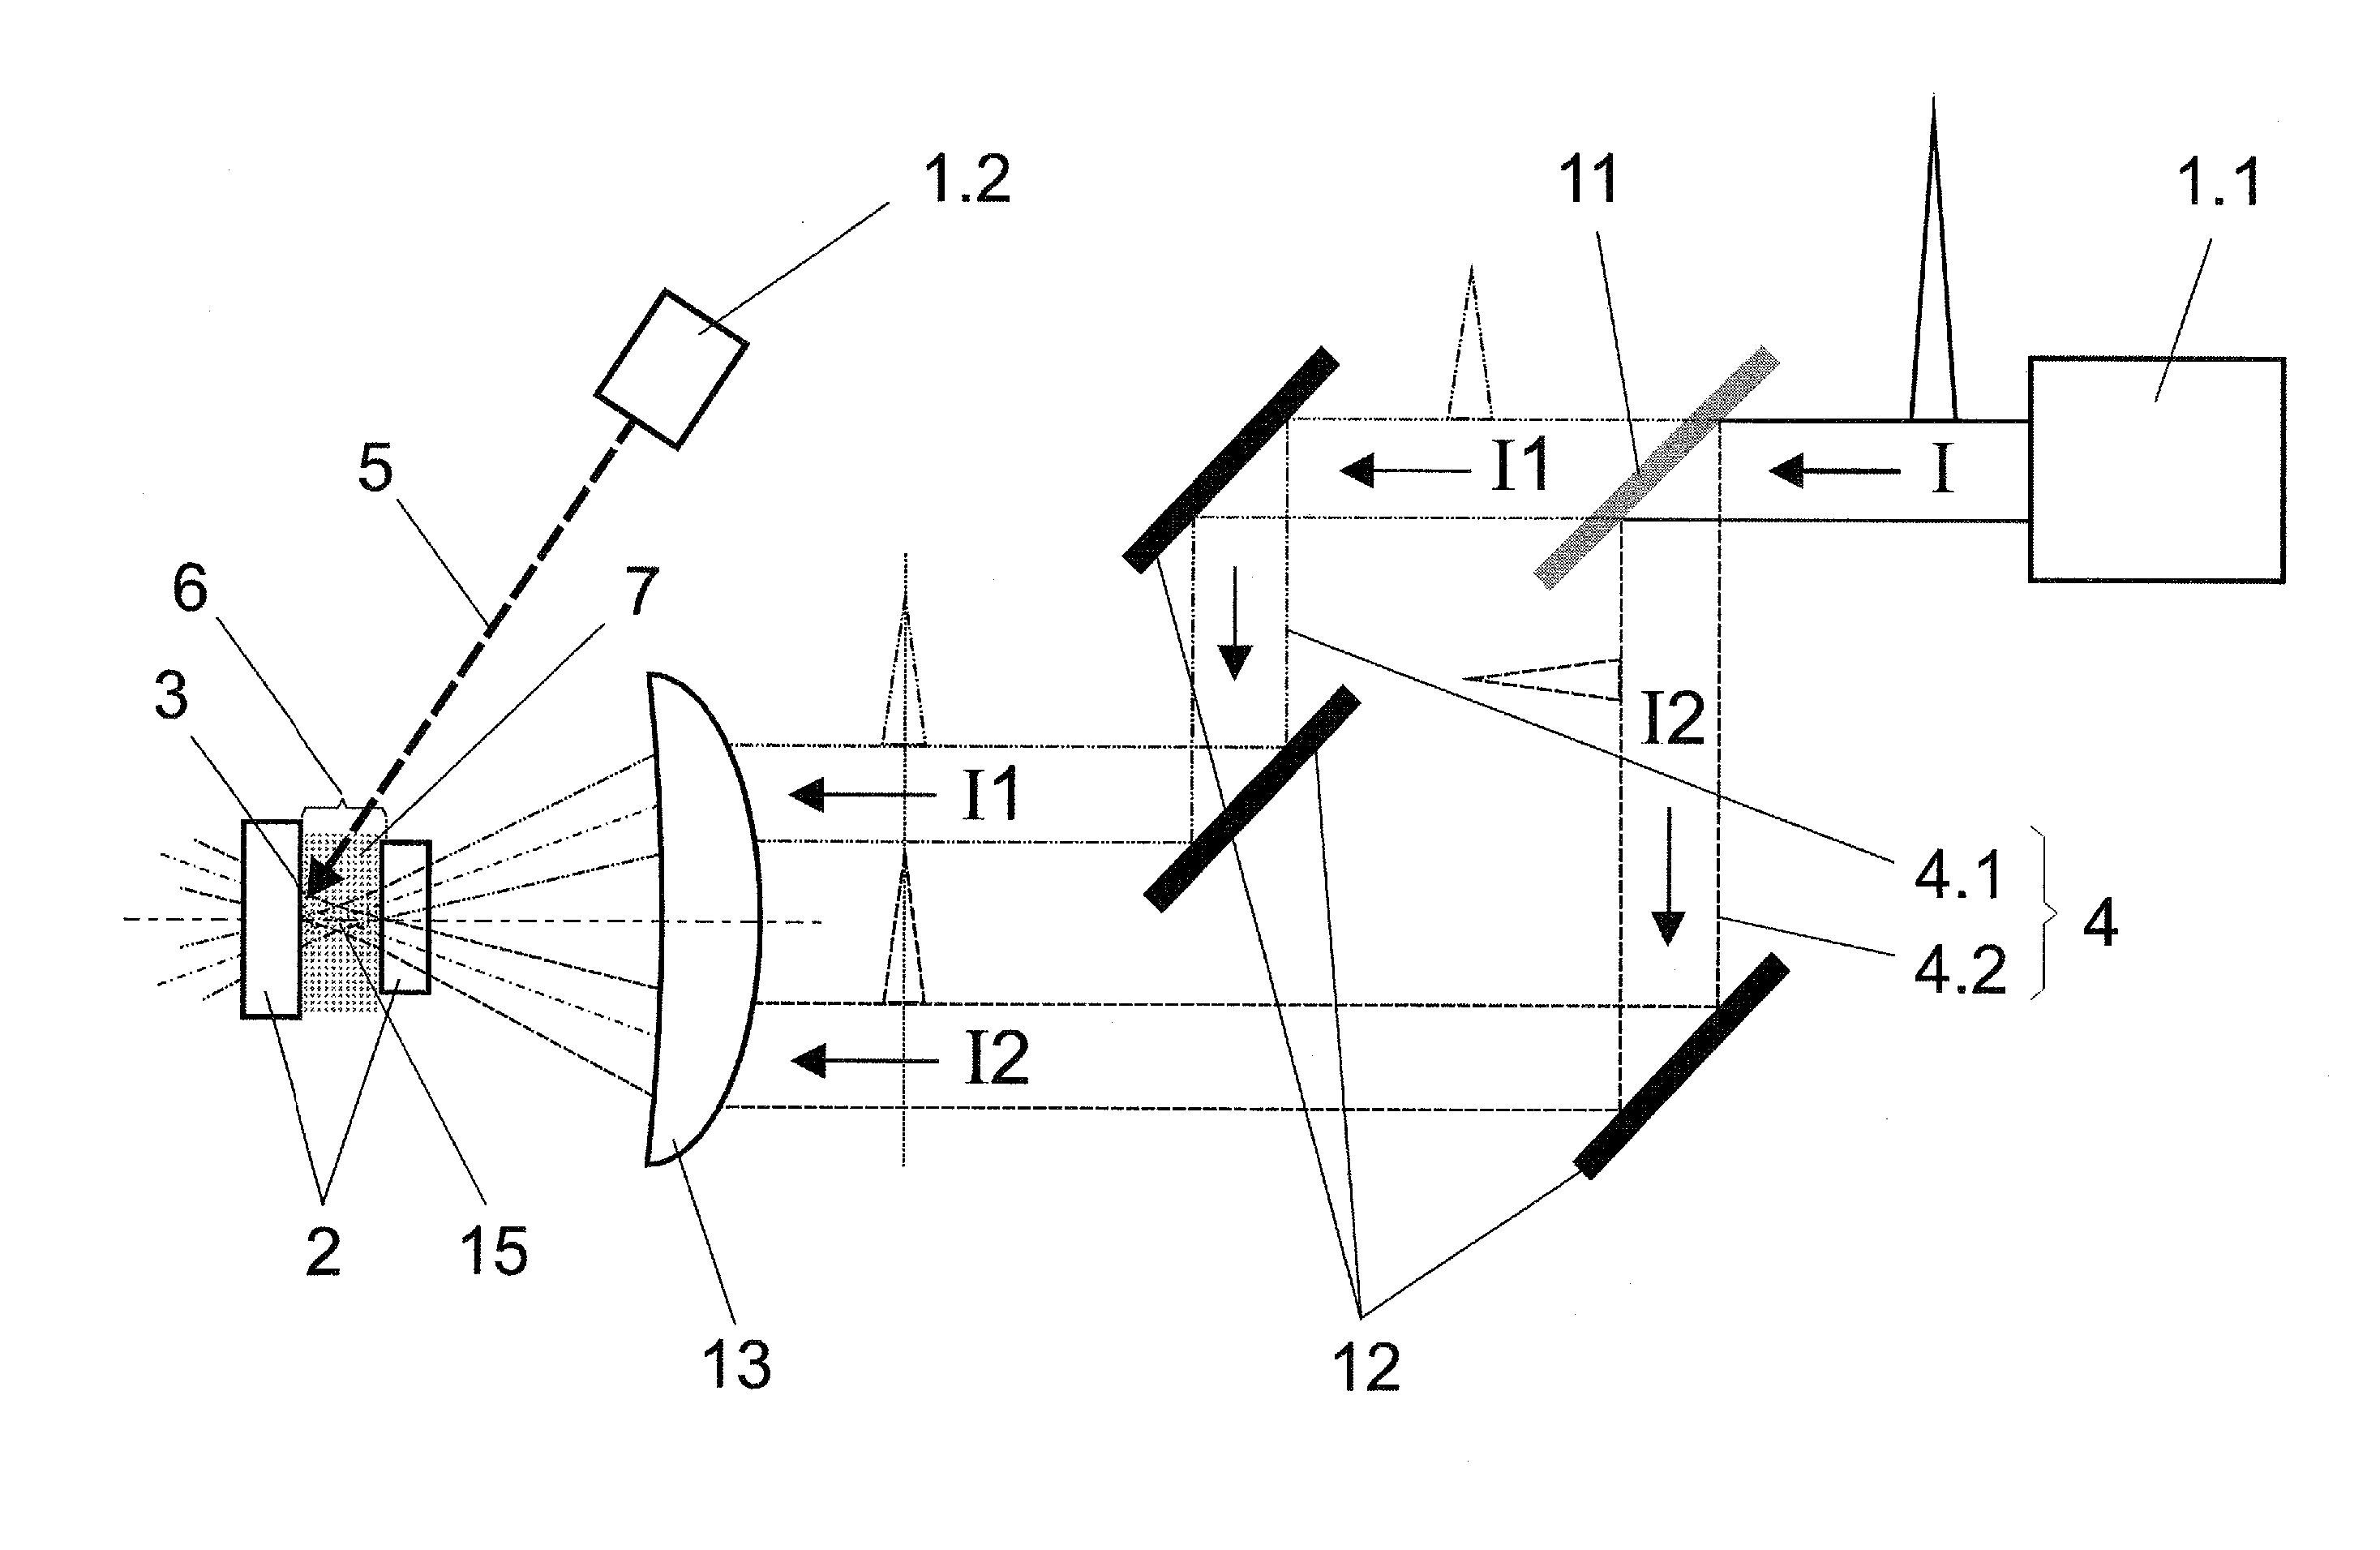 Method and Apparatus for the Generation of EUV Radiation from a Gas Discharge Plasma